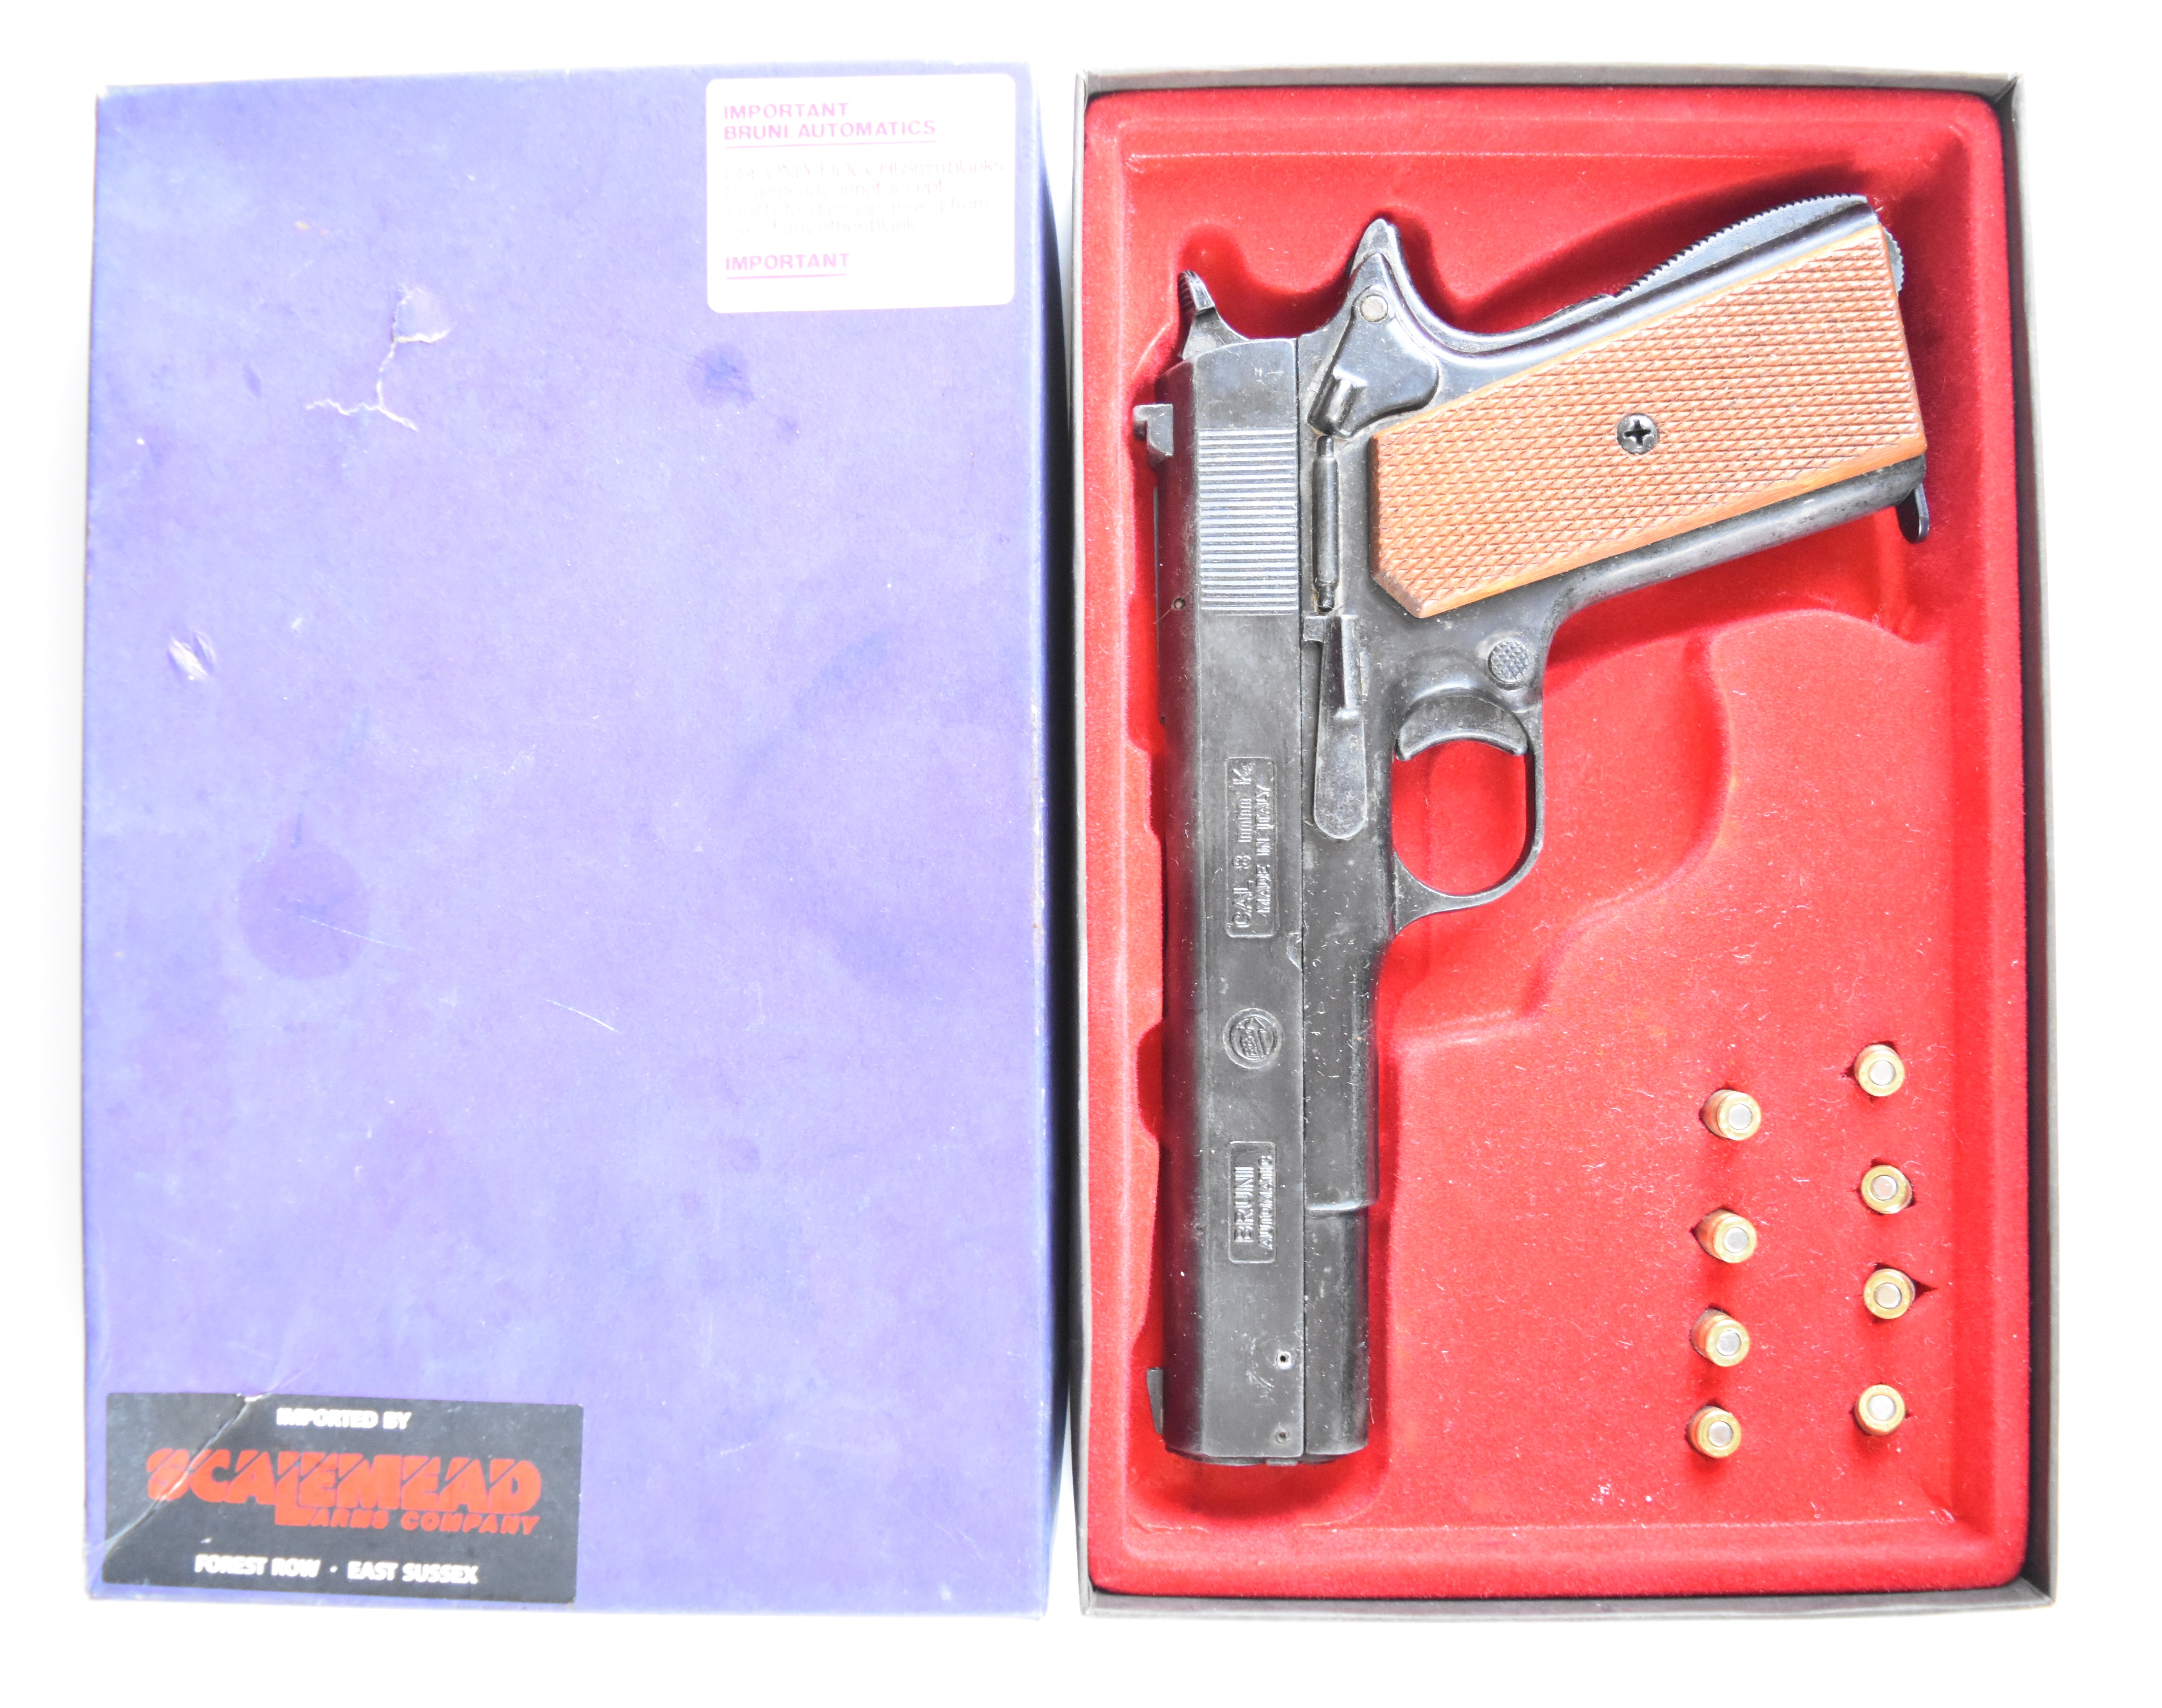 BBM Bruni 8mm blank firing pistol with chequered wooden grips, in original fitted box.